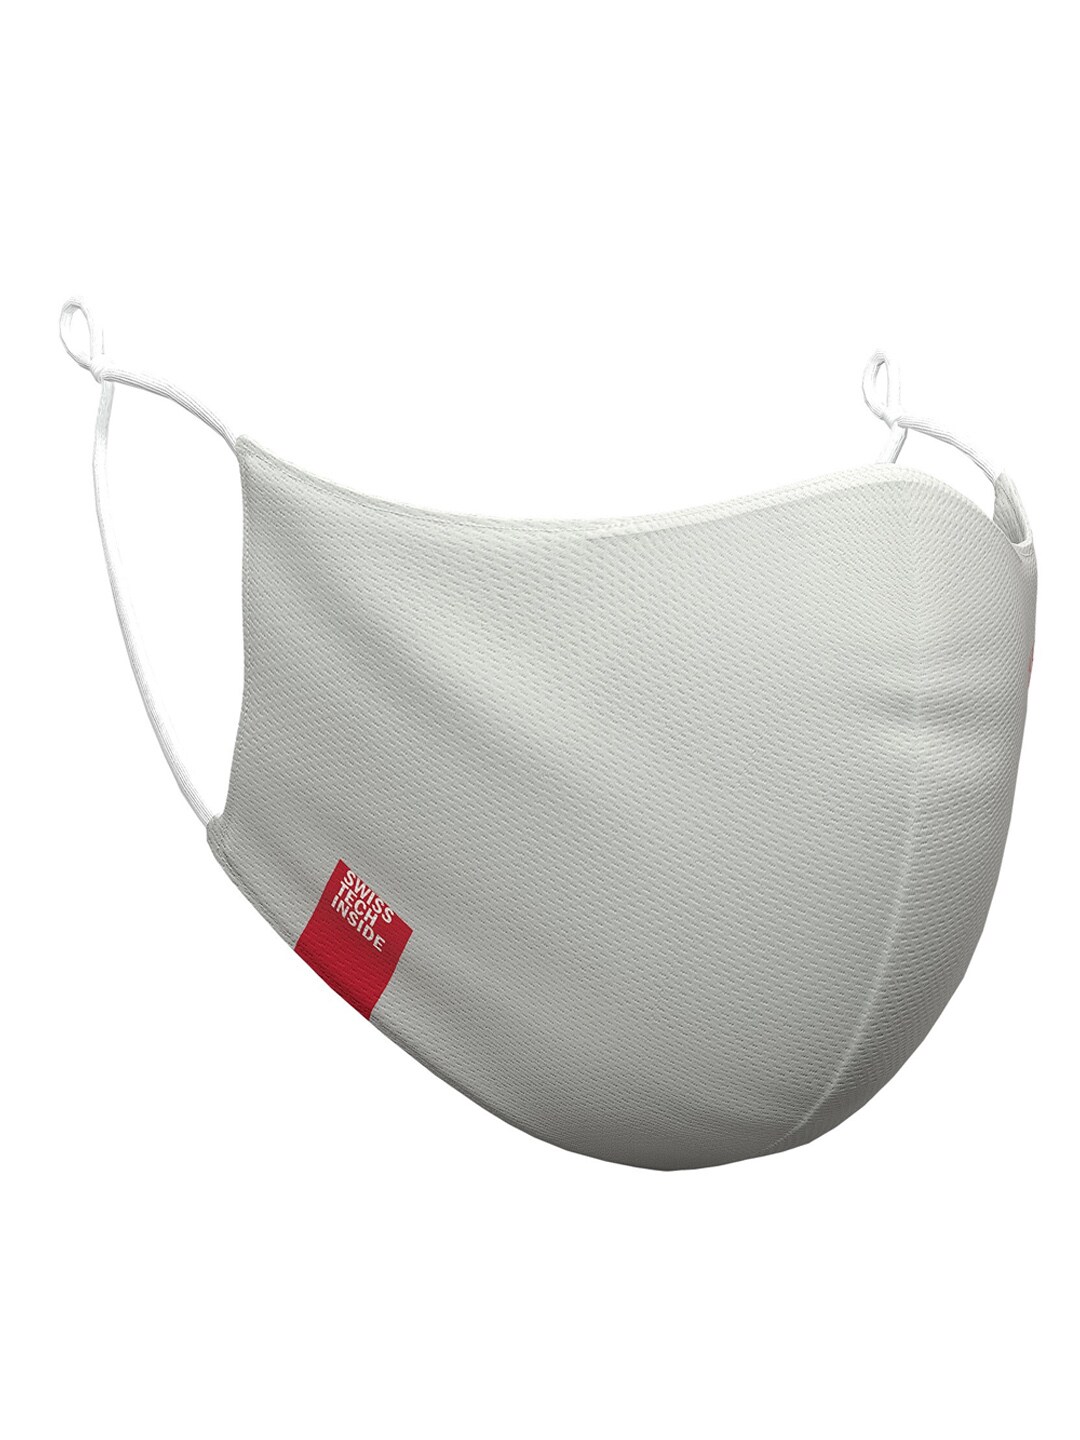 HEIQ VIROBLOCK Unisex Off-White Solid 4-Ply Reusable Cloth Mask Price in India